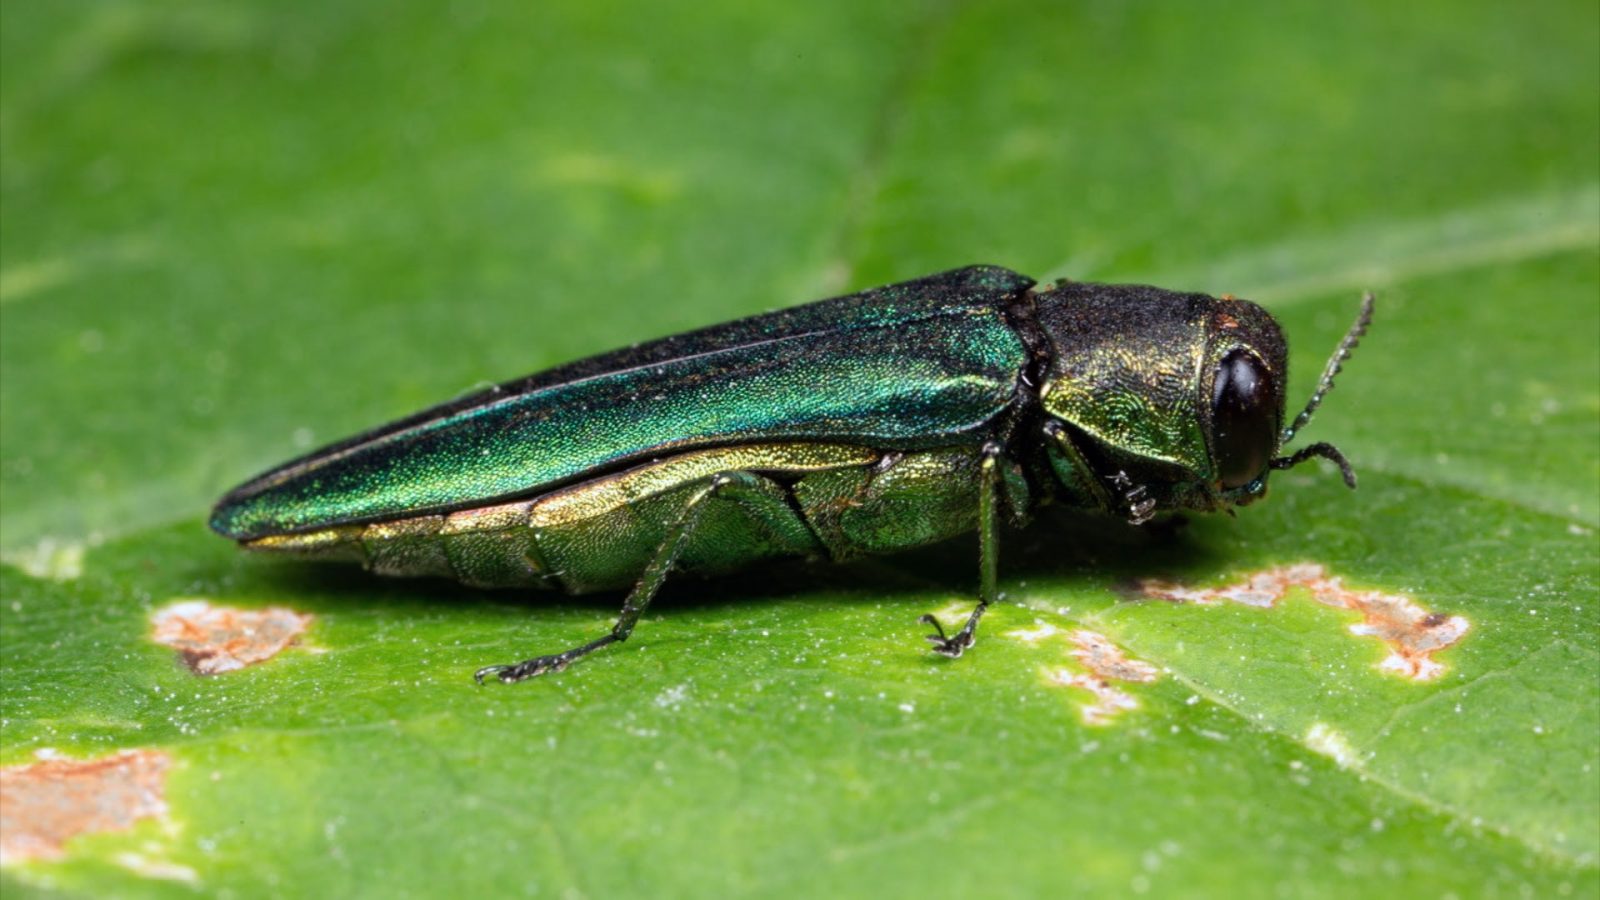 Plymouth 'Getting Hammered' with Emerald Ash Borer Infestation